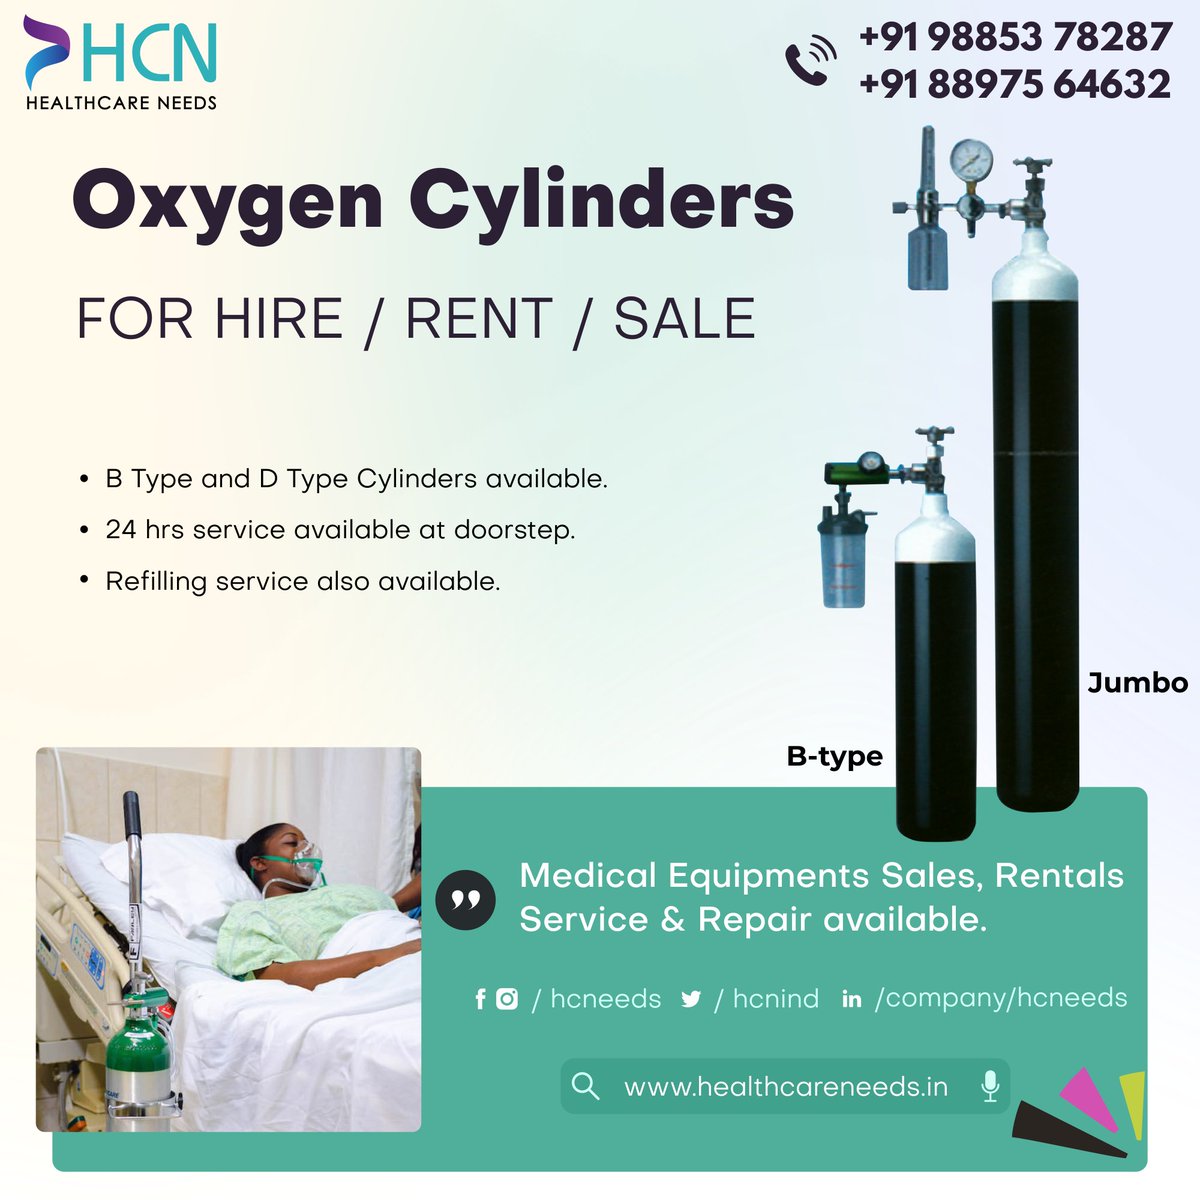 Oxygen Cylinders for Hire or Sale or Rent.
Medical Equipment Sales, Service and Repair Available.

#jumbooxygencylinder #btypeoxygencylinder #steeloxygencylinders #stainlesslsteeloxygencylinders #btypeoxygen #oxygencylinders #oxygen #oxygenmask #oxygencylinder #portableoxygen